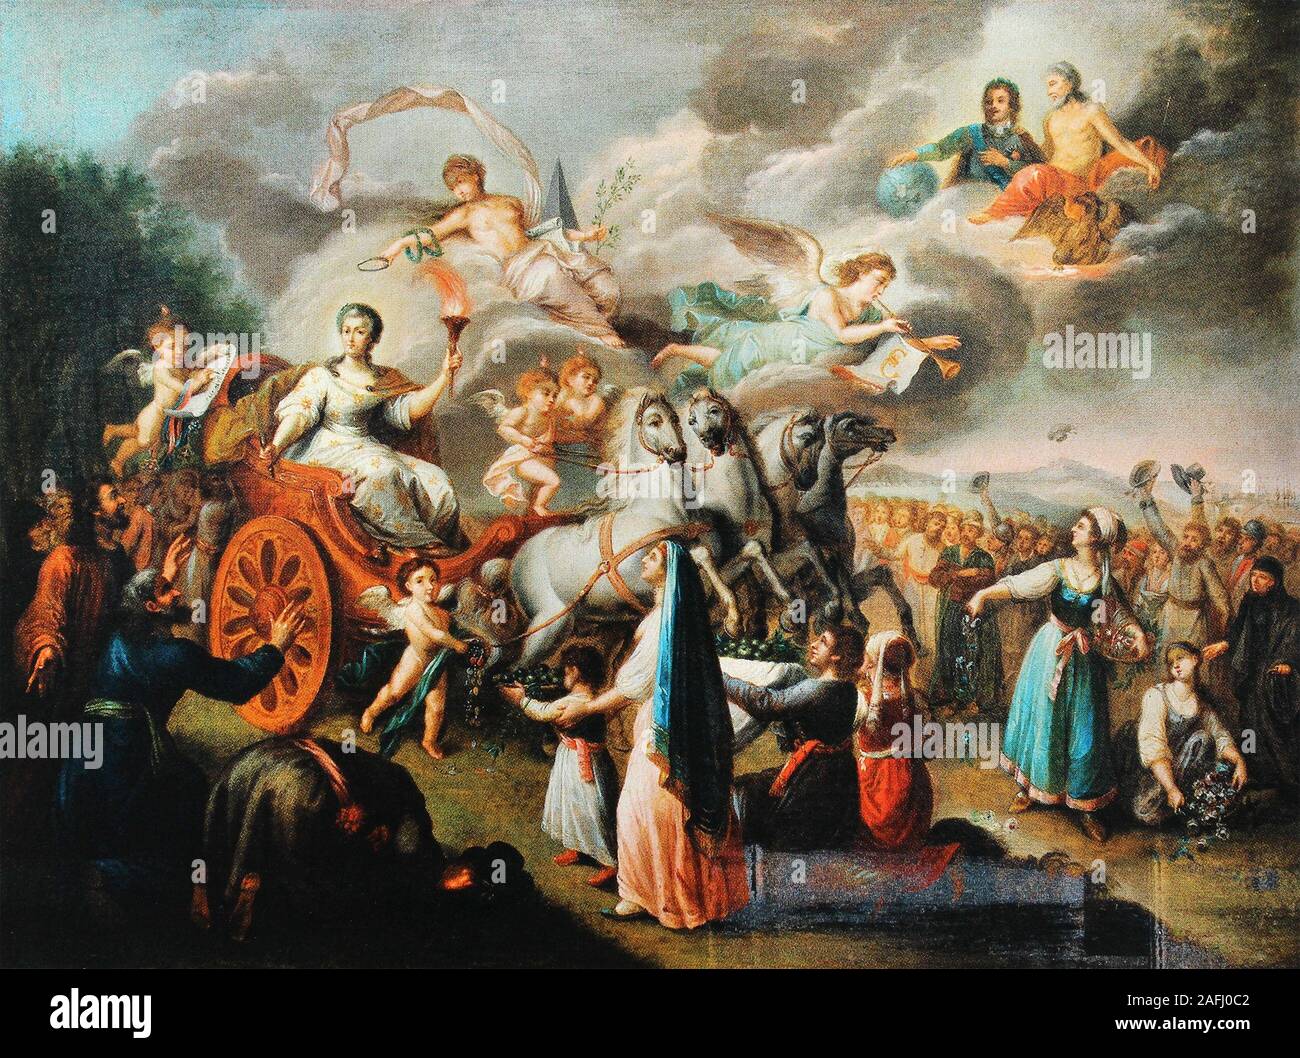 Allegory of the journey of the Russian Empress Catherine II to the Crimea in 1787. Stock Photo